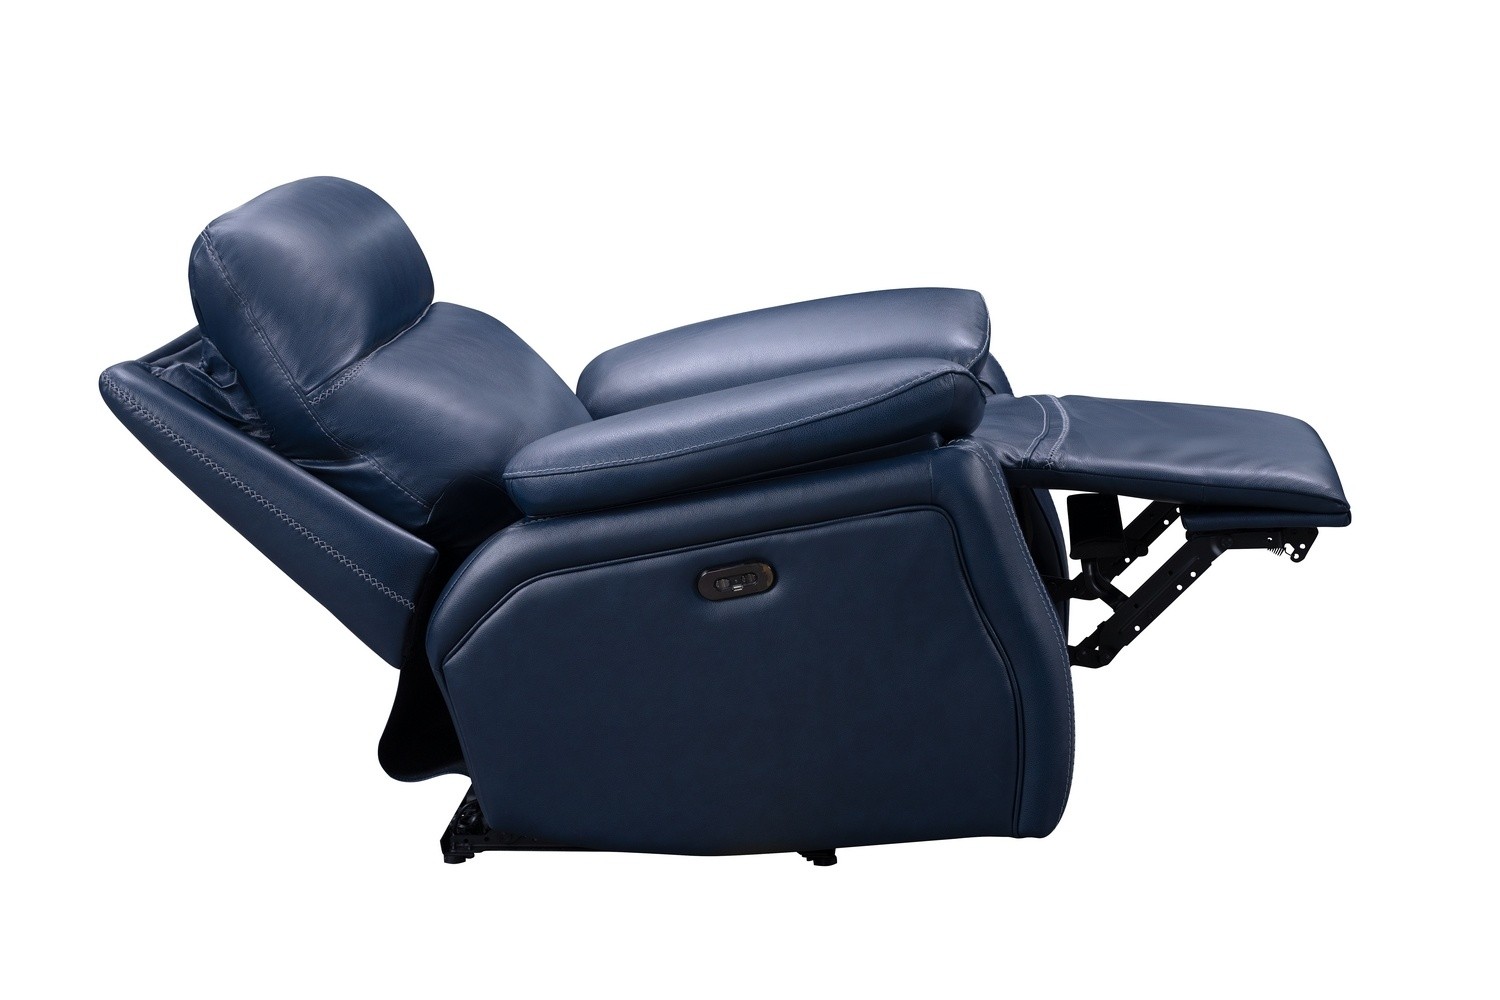 Barcalounger Micah Power Recliner Chair with Power Head Rest - Marco Navy Blue/Leather Match